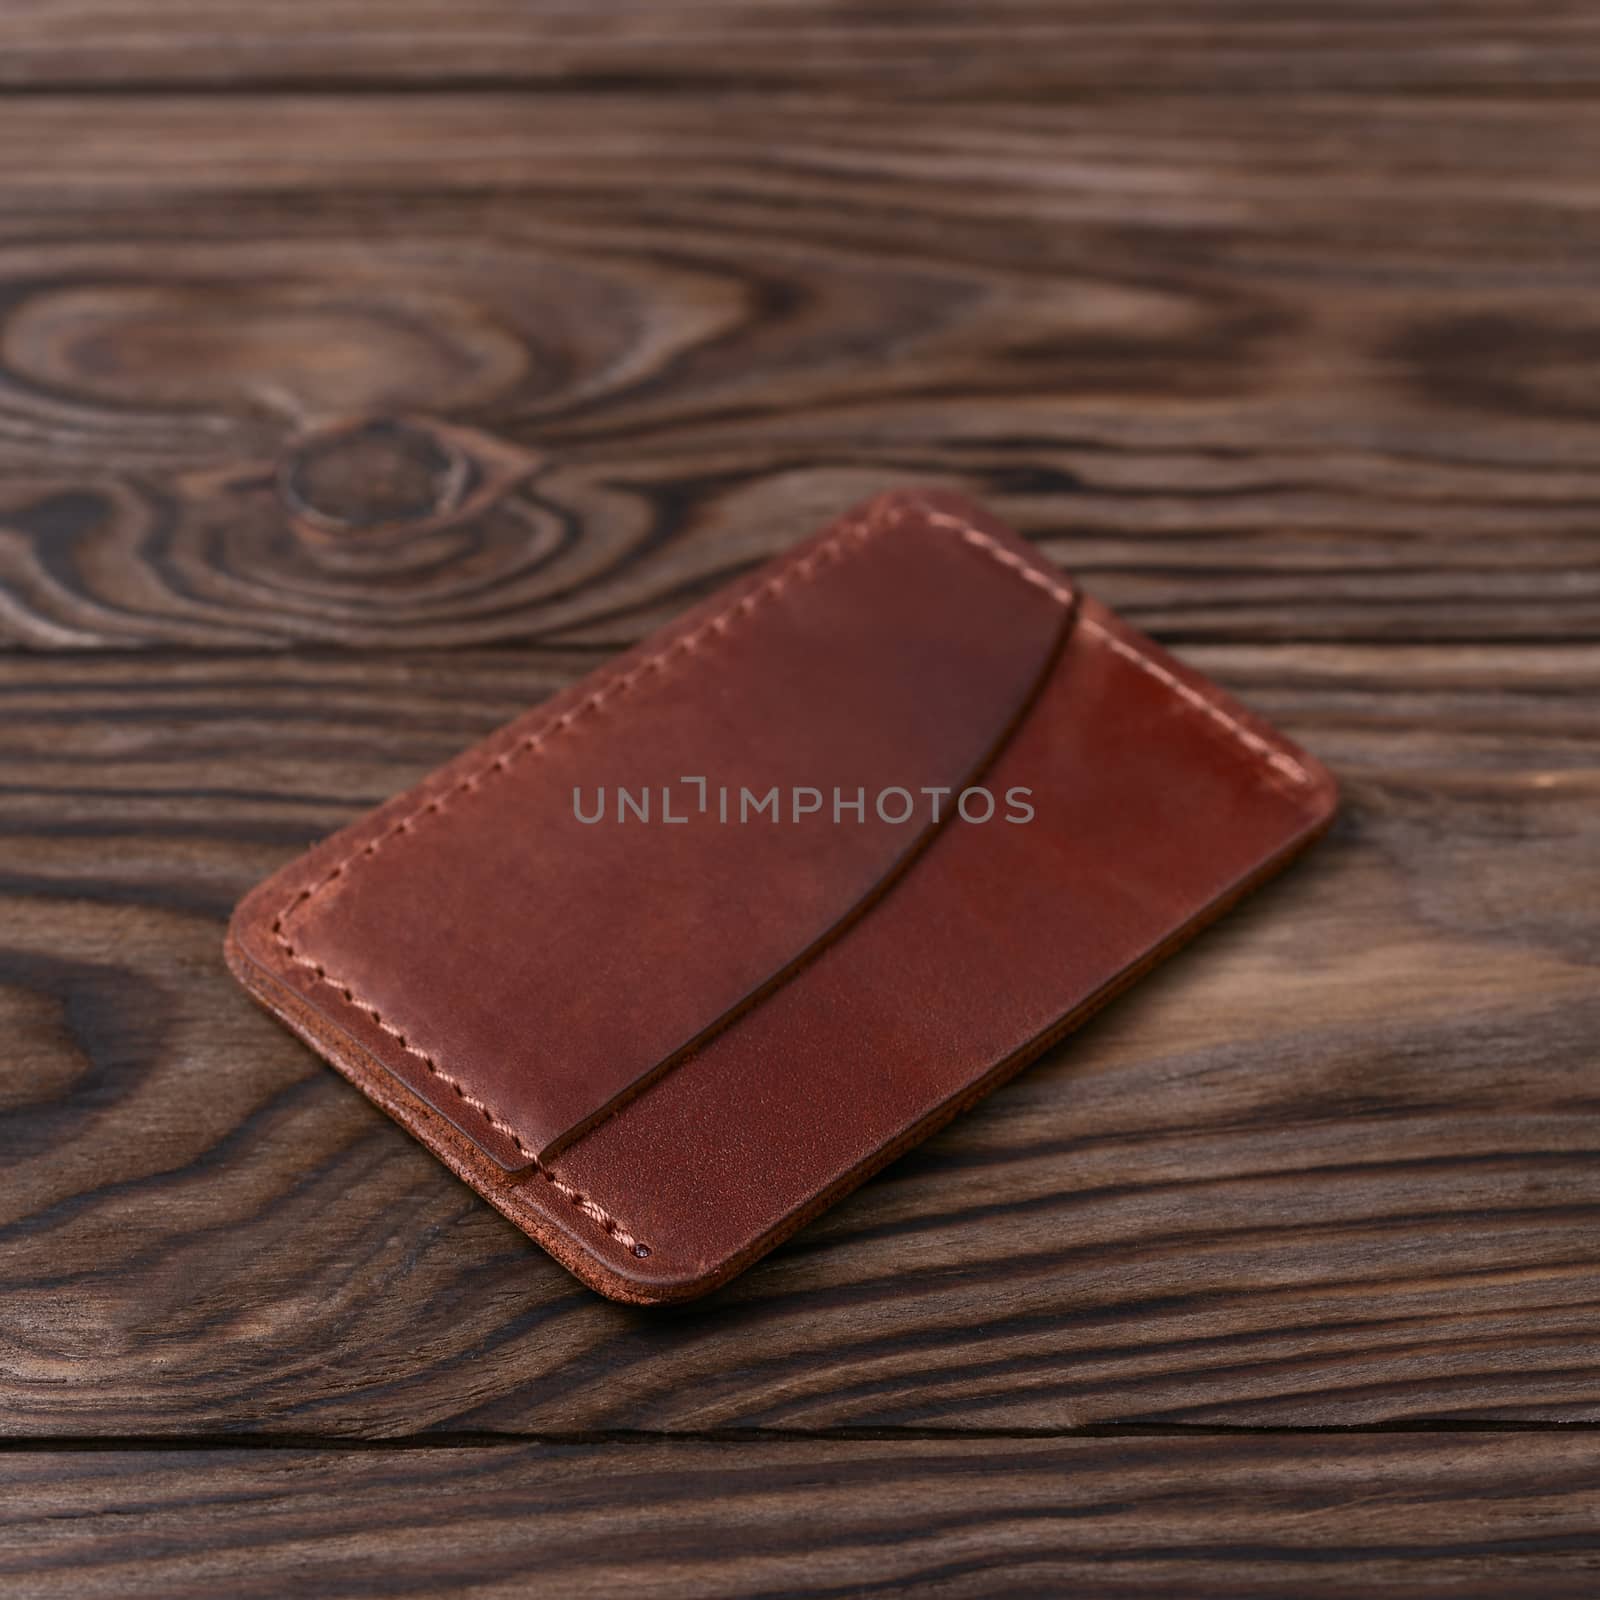 Ginger colour handmade leather one pocket cardholder on wooden background. Stock photo with soft blurred background.